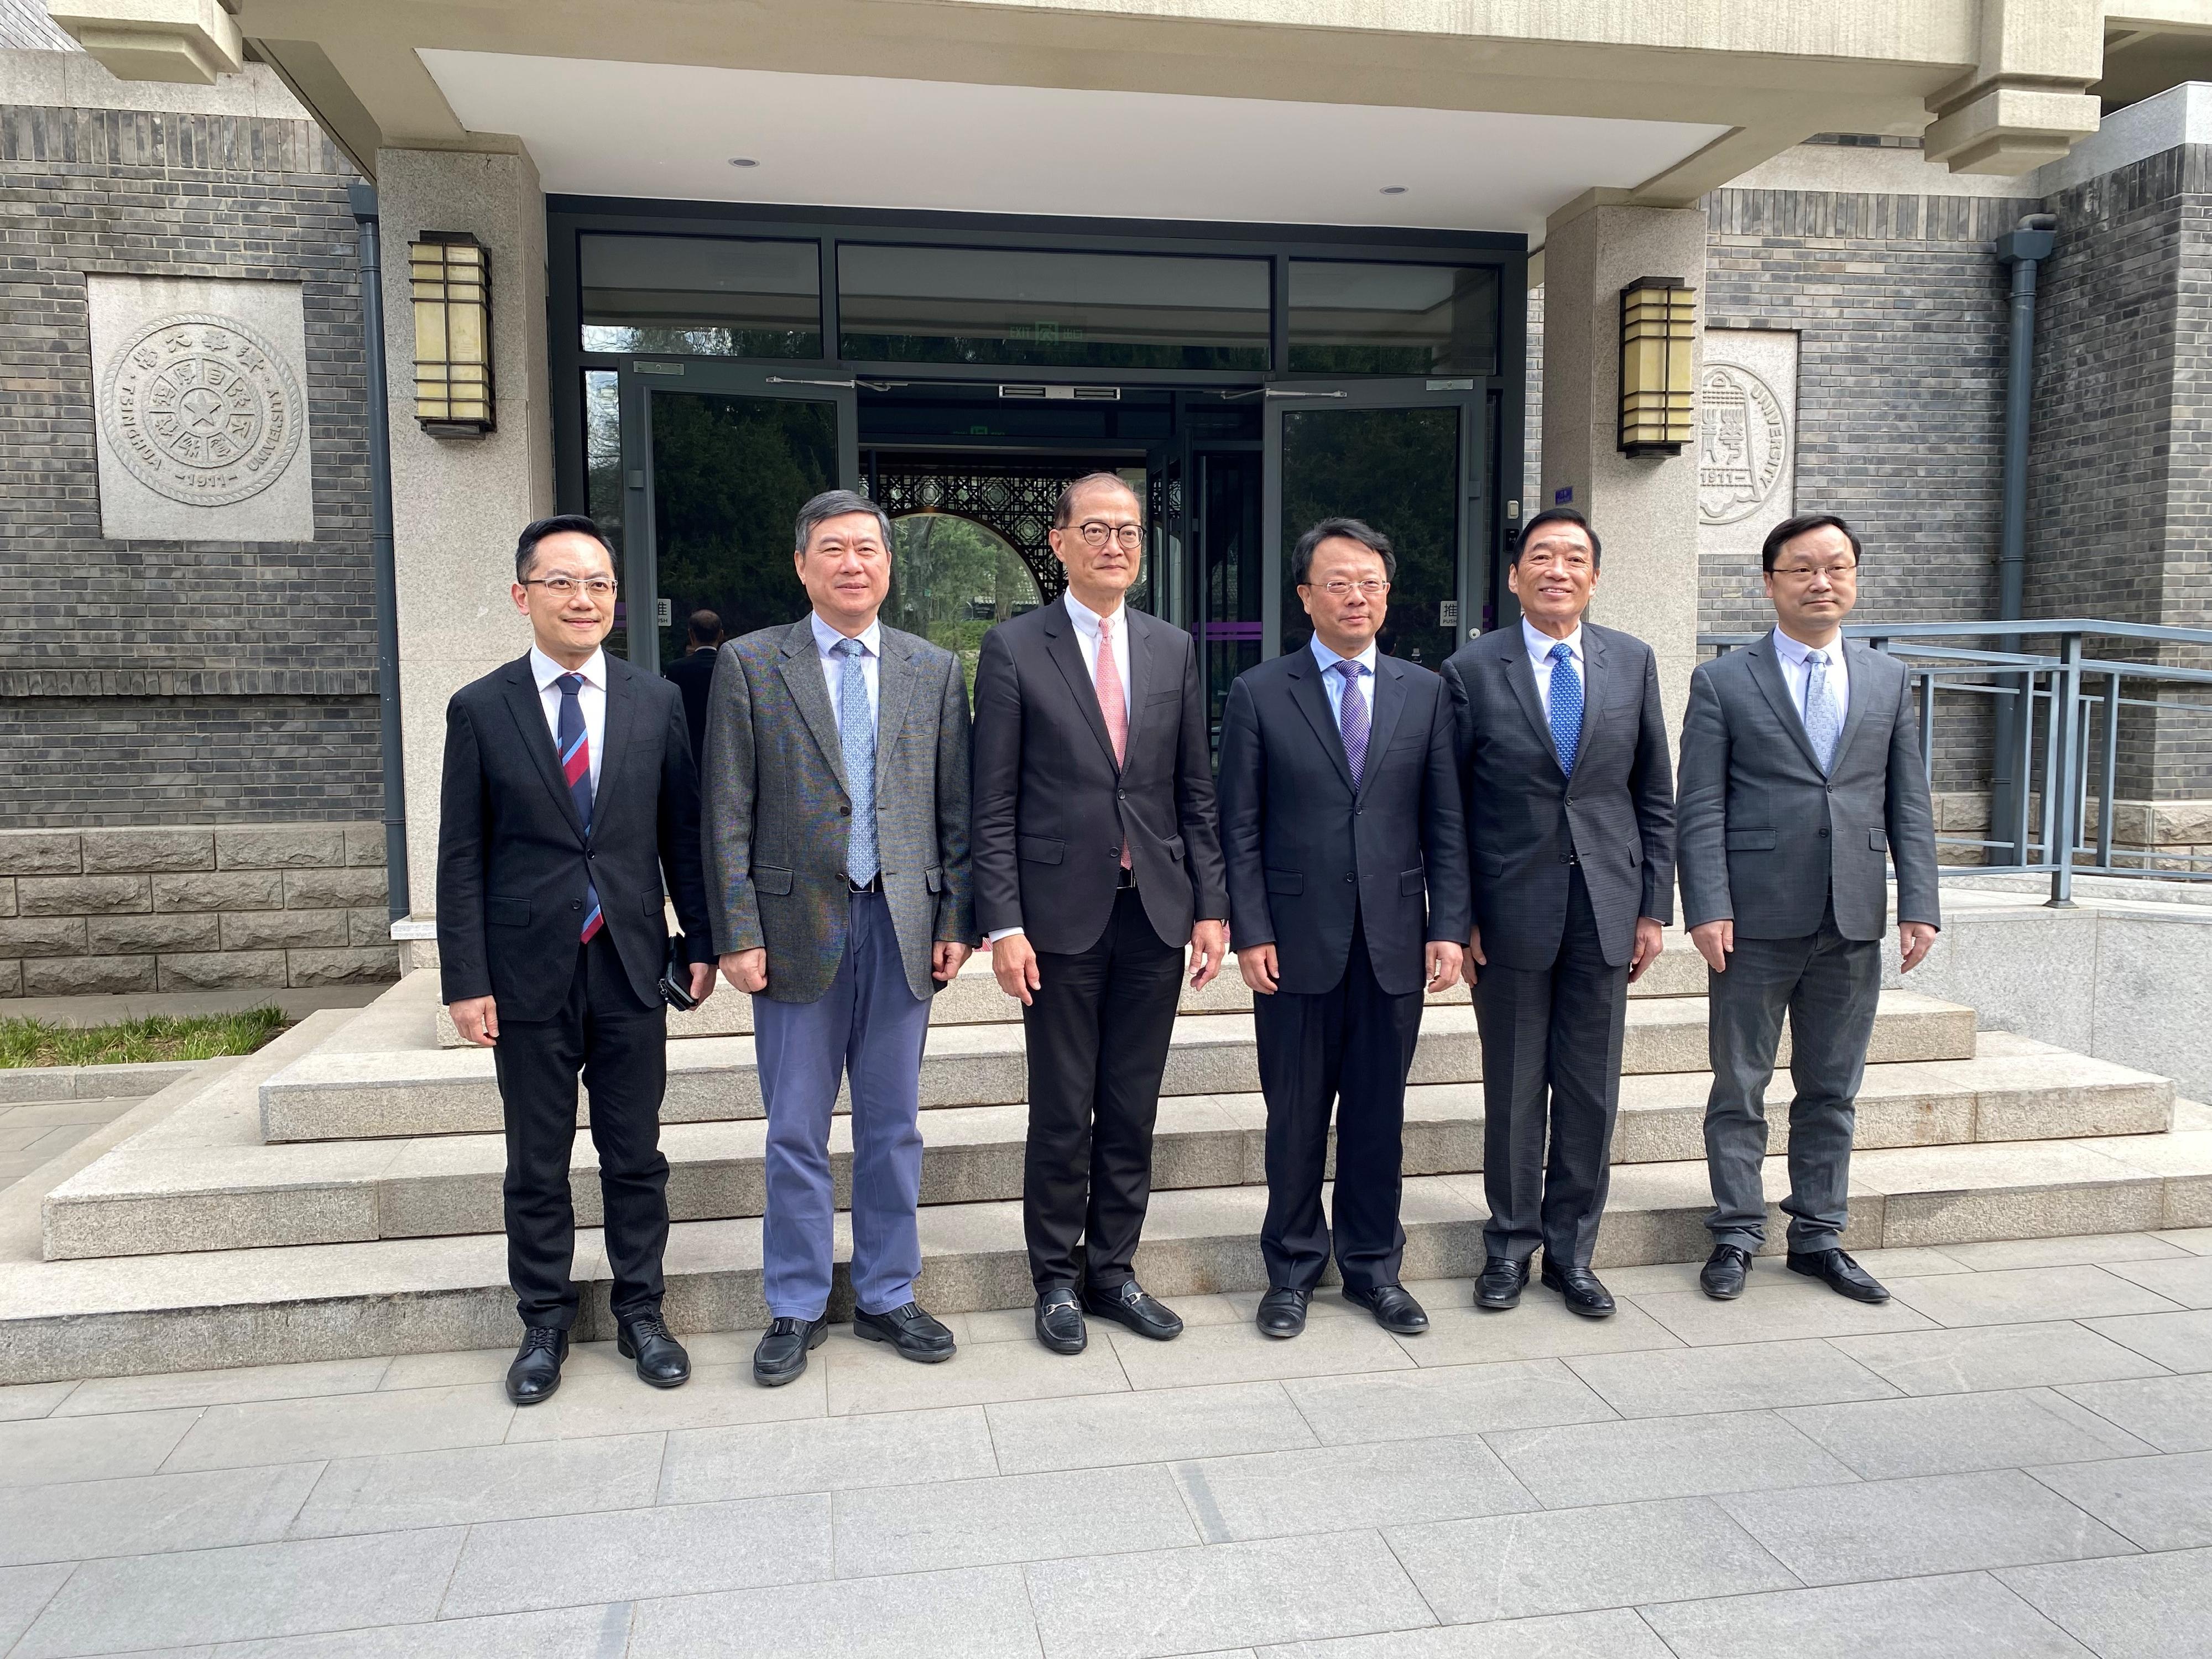 The Secretary for Health, Professor Lo Chung-mau (third left), and his delegation visited Tsinghua University and met with the Deputy Secretary of the CPC Tsinghua University Committee and President of Tsinghua University, Professor Wang Xiqin (third right), and the Executive President of the Beijing Tsinghua Changgung Hospital affiliated with Tsinghua University and Dean of the School of Clinical Medicine of Tsinghua University, Dr Dong Jiahong (second left), today (March 17). The Director of Health, Dr Ronald Lam (first left), and the Chairman of the Hospital Authority, Mr Henry Fan (second right), also attended.